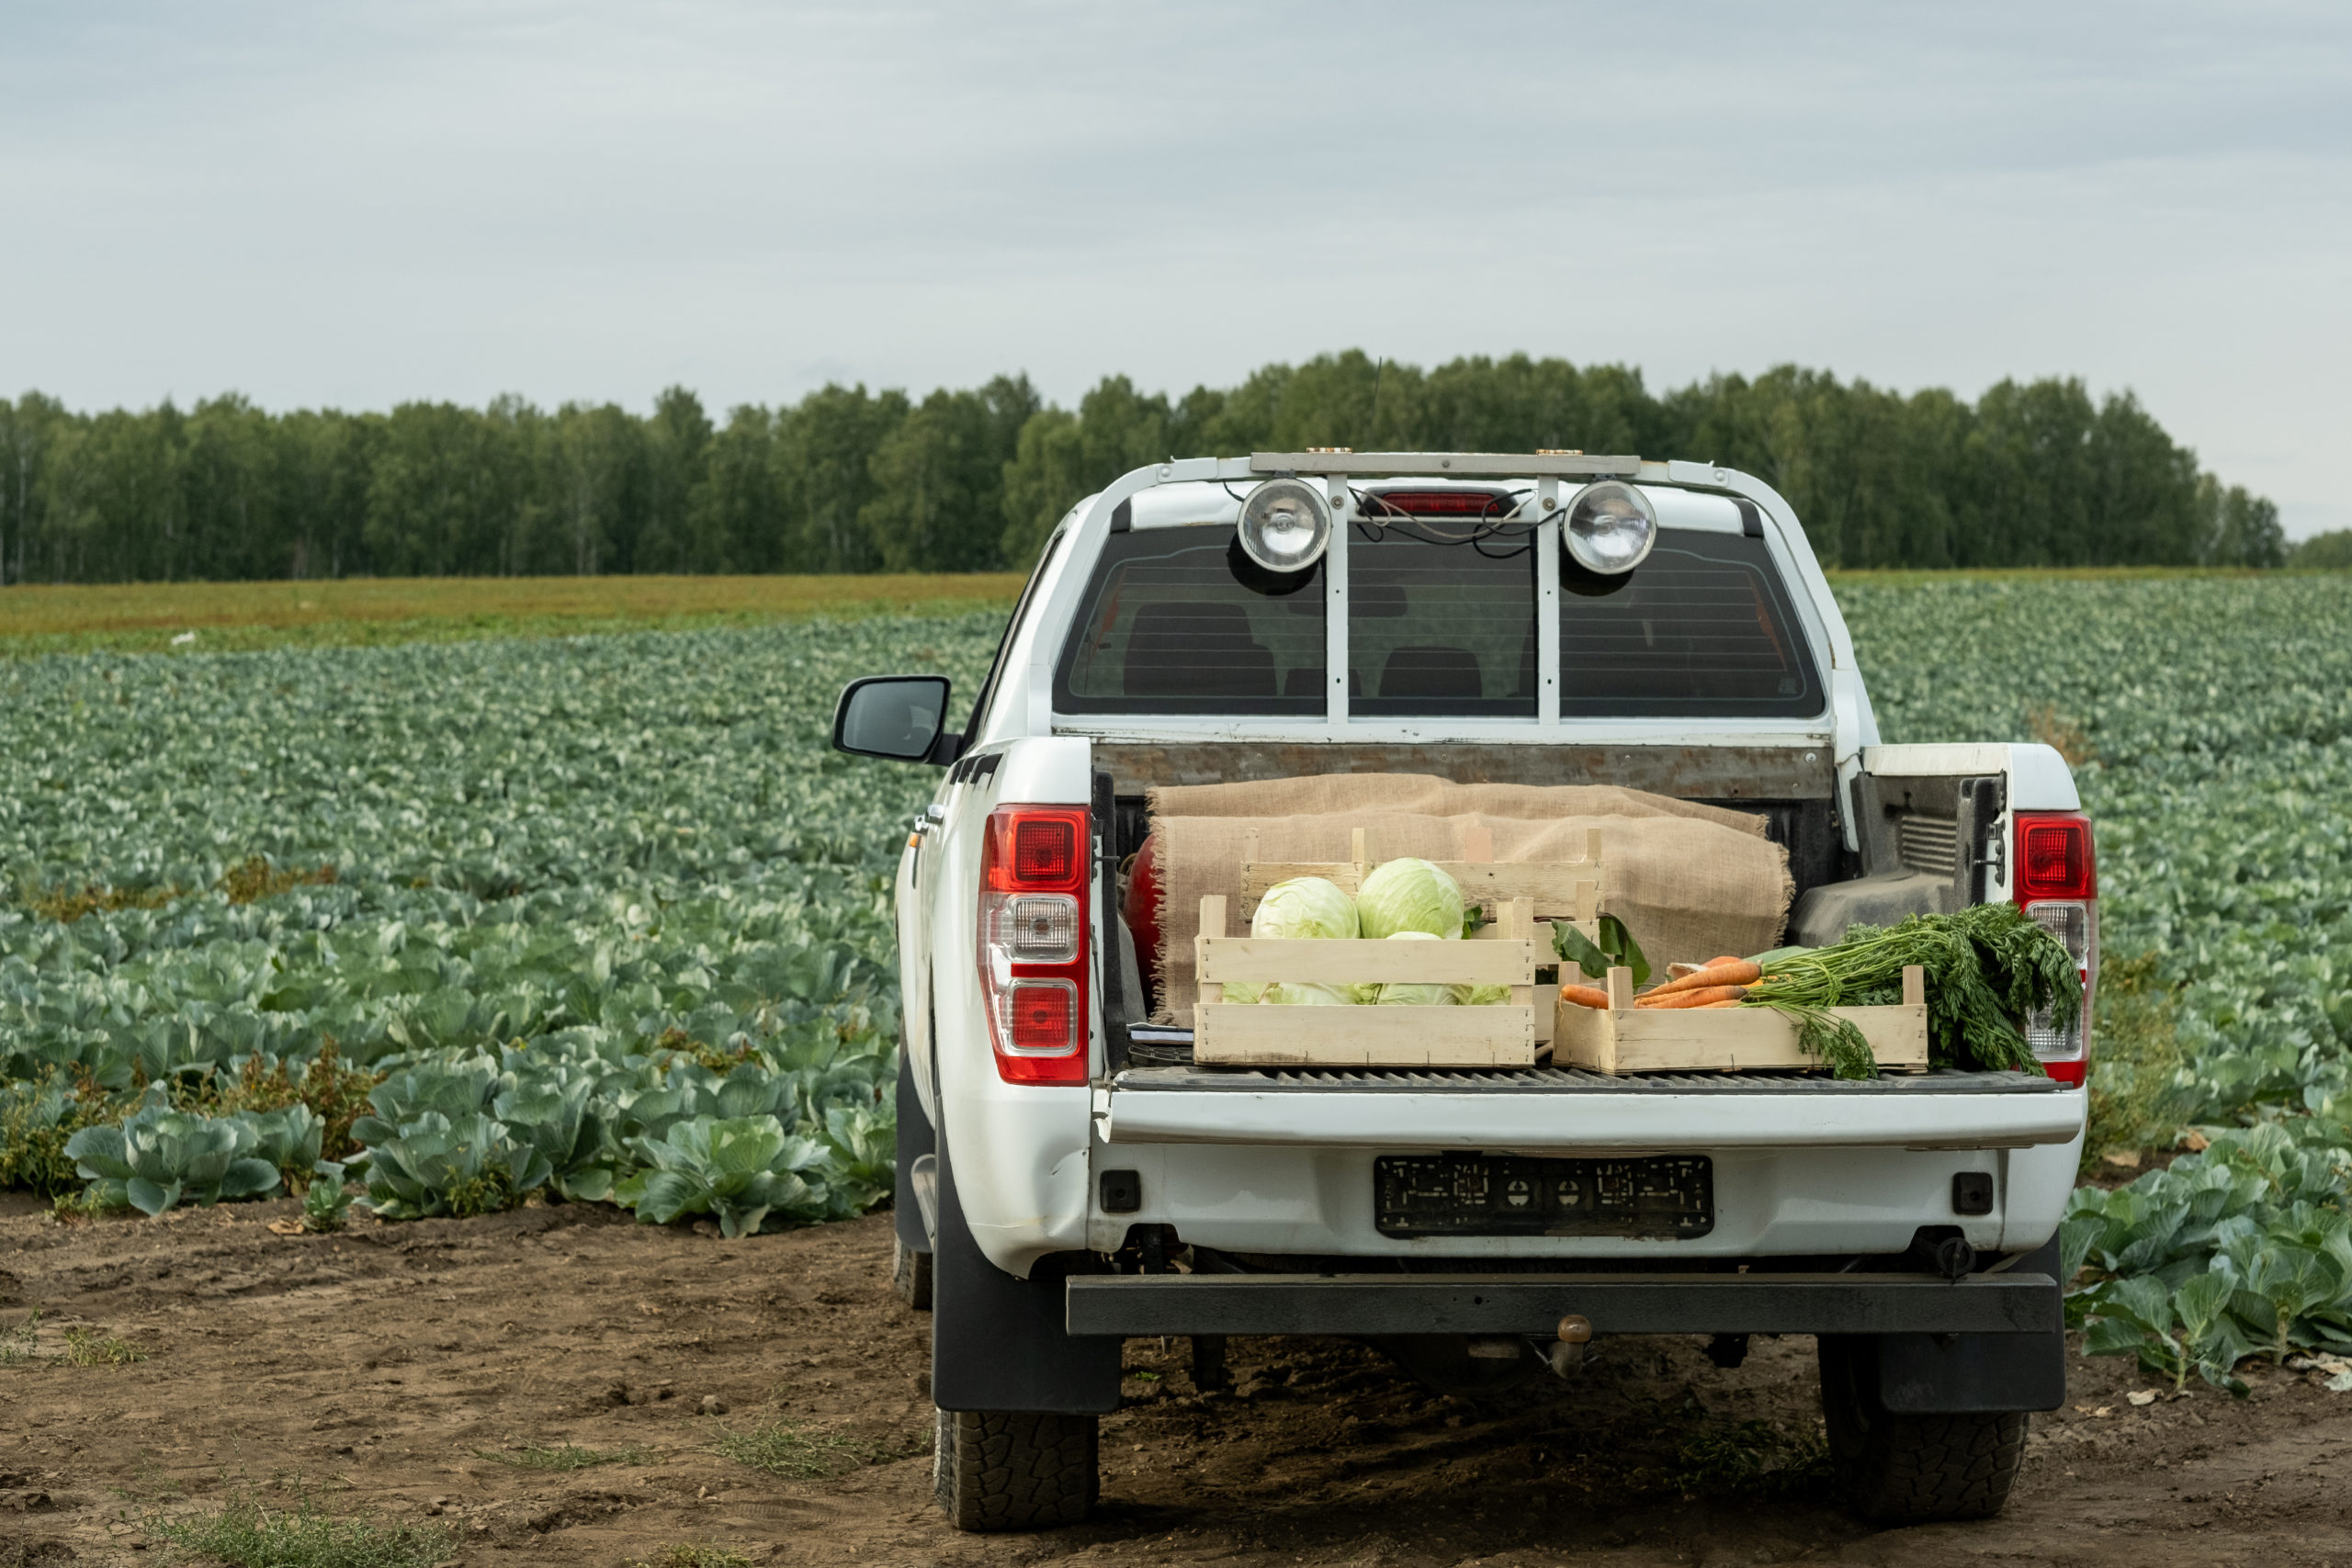 https://autolab.com.co/wp-content/uploads/2023/09/pickup-truck-with-vegetable-crop-2021-12-09-09-46-08-utc-scaled.jpg